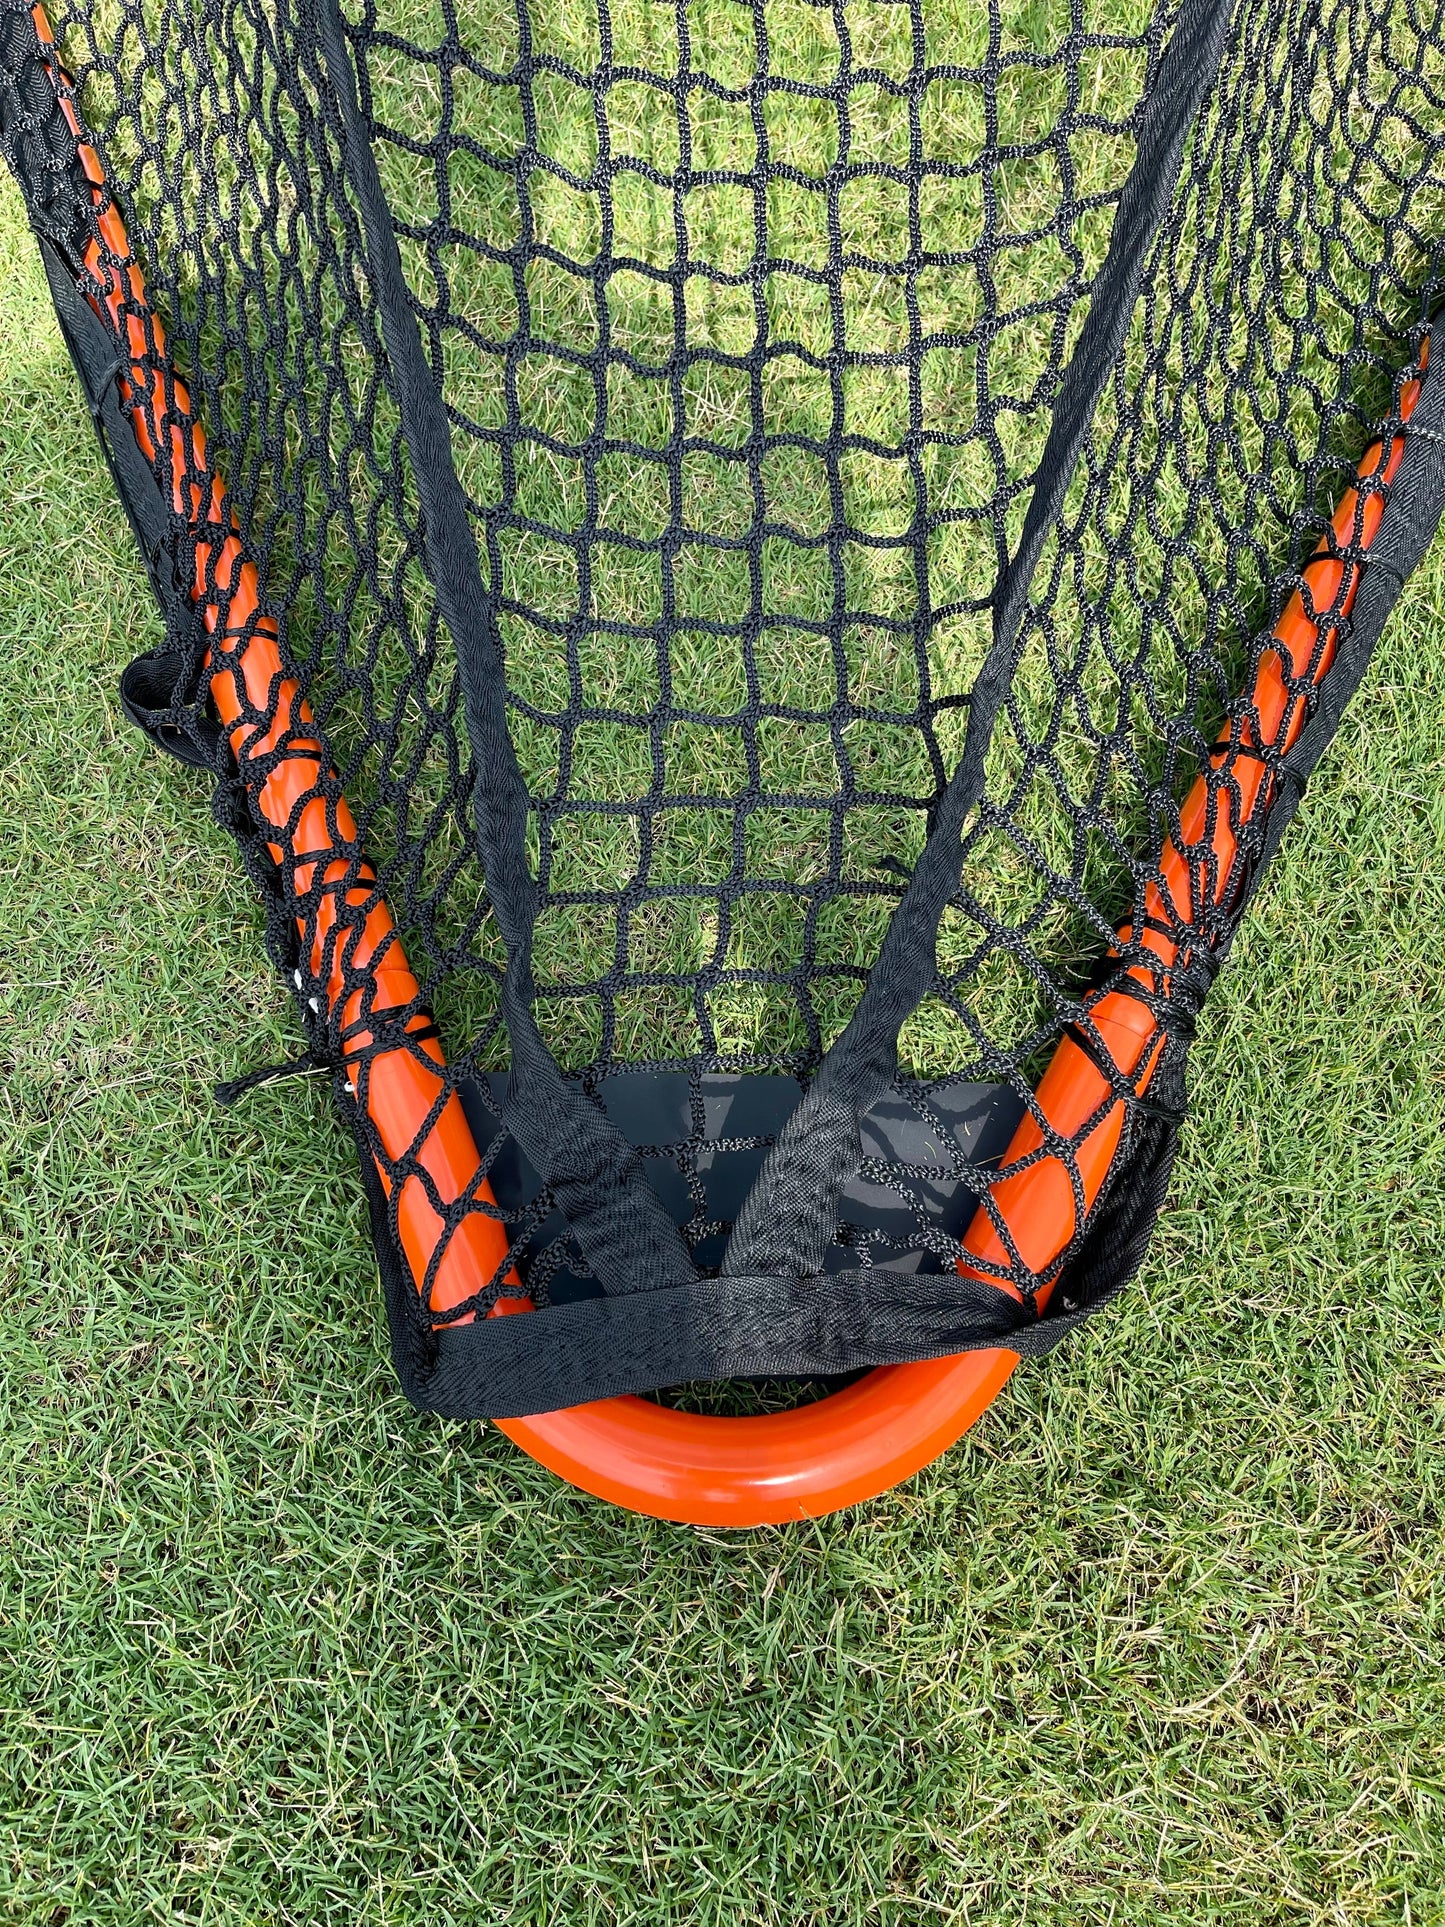 Open Box, Folding Lacrosse Goal - 30 lbs, 6'x6'x7' by Crankshooter® INCLUDED with  5mm BLACK Net - FREE Shipping (Copy)